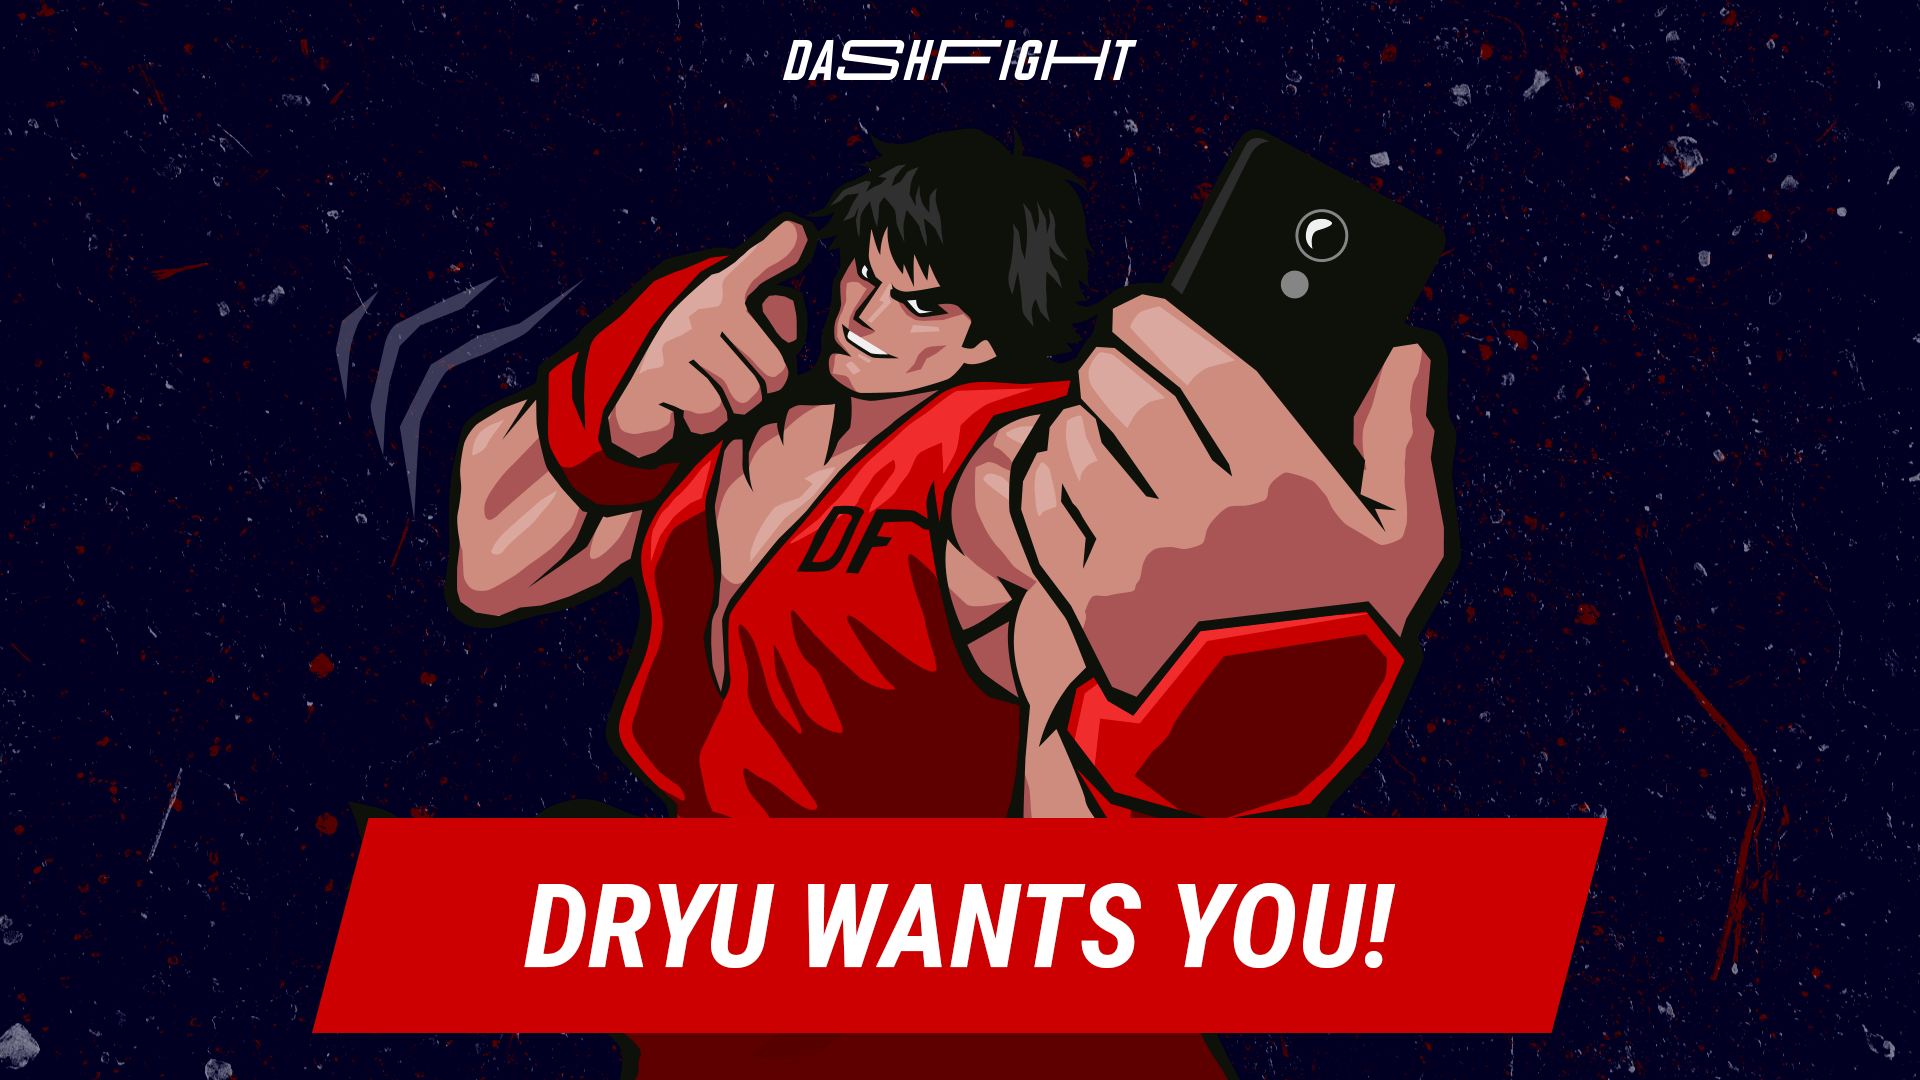 Why You Really Need to Check Out DashFight's New Mobile App